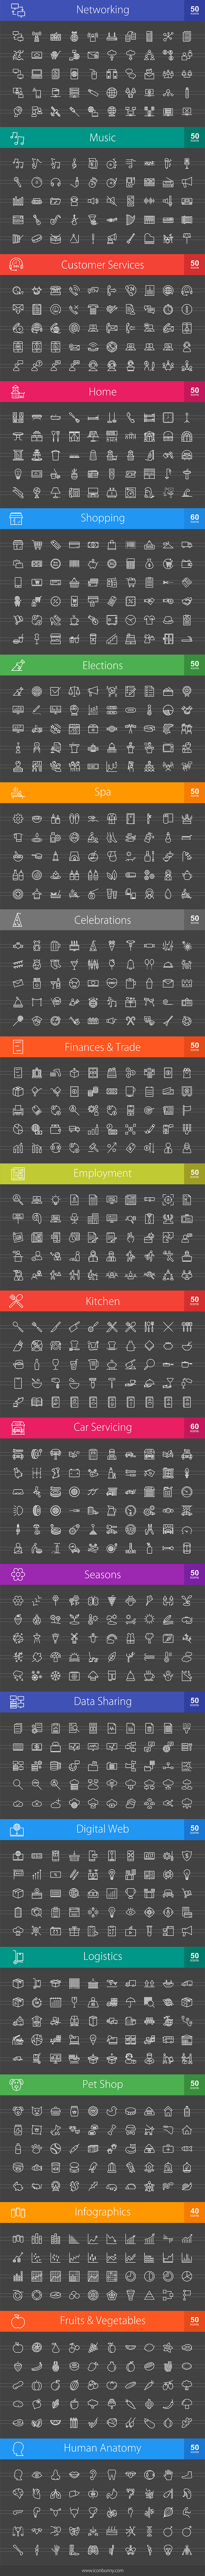 1010 Line Inverted Icons in Icons - product preview 1